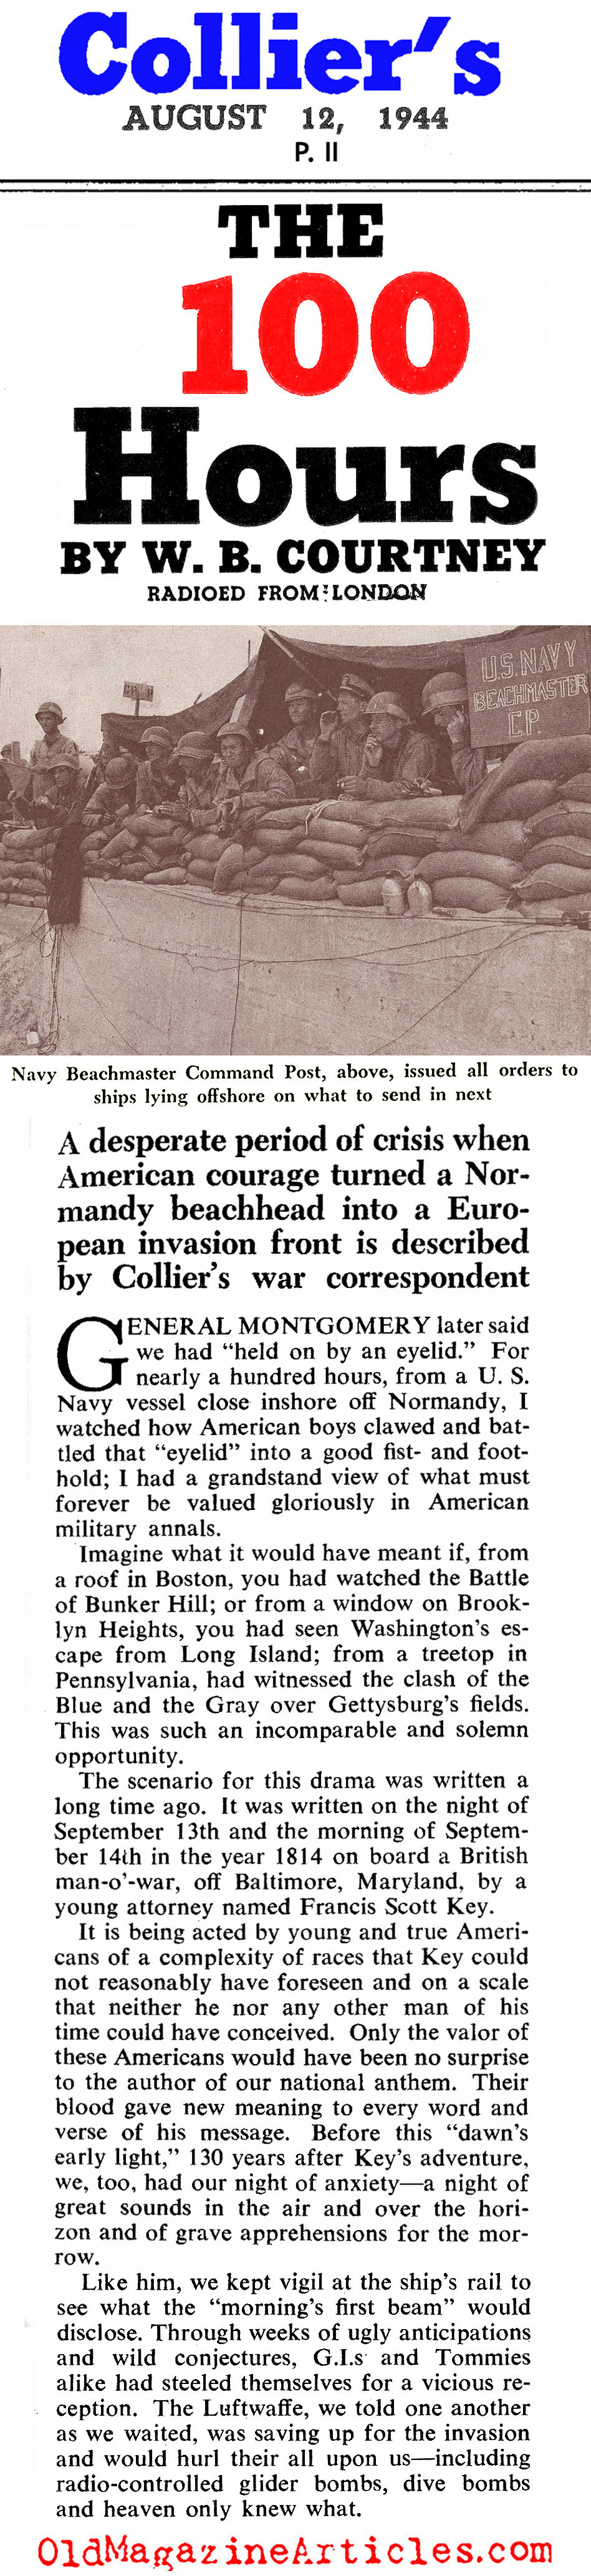 The First 100 Hours (Collier's Magazine, 1944)